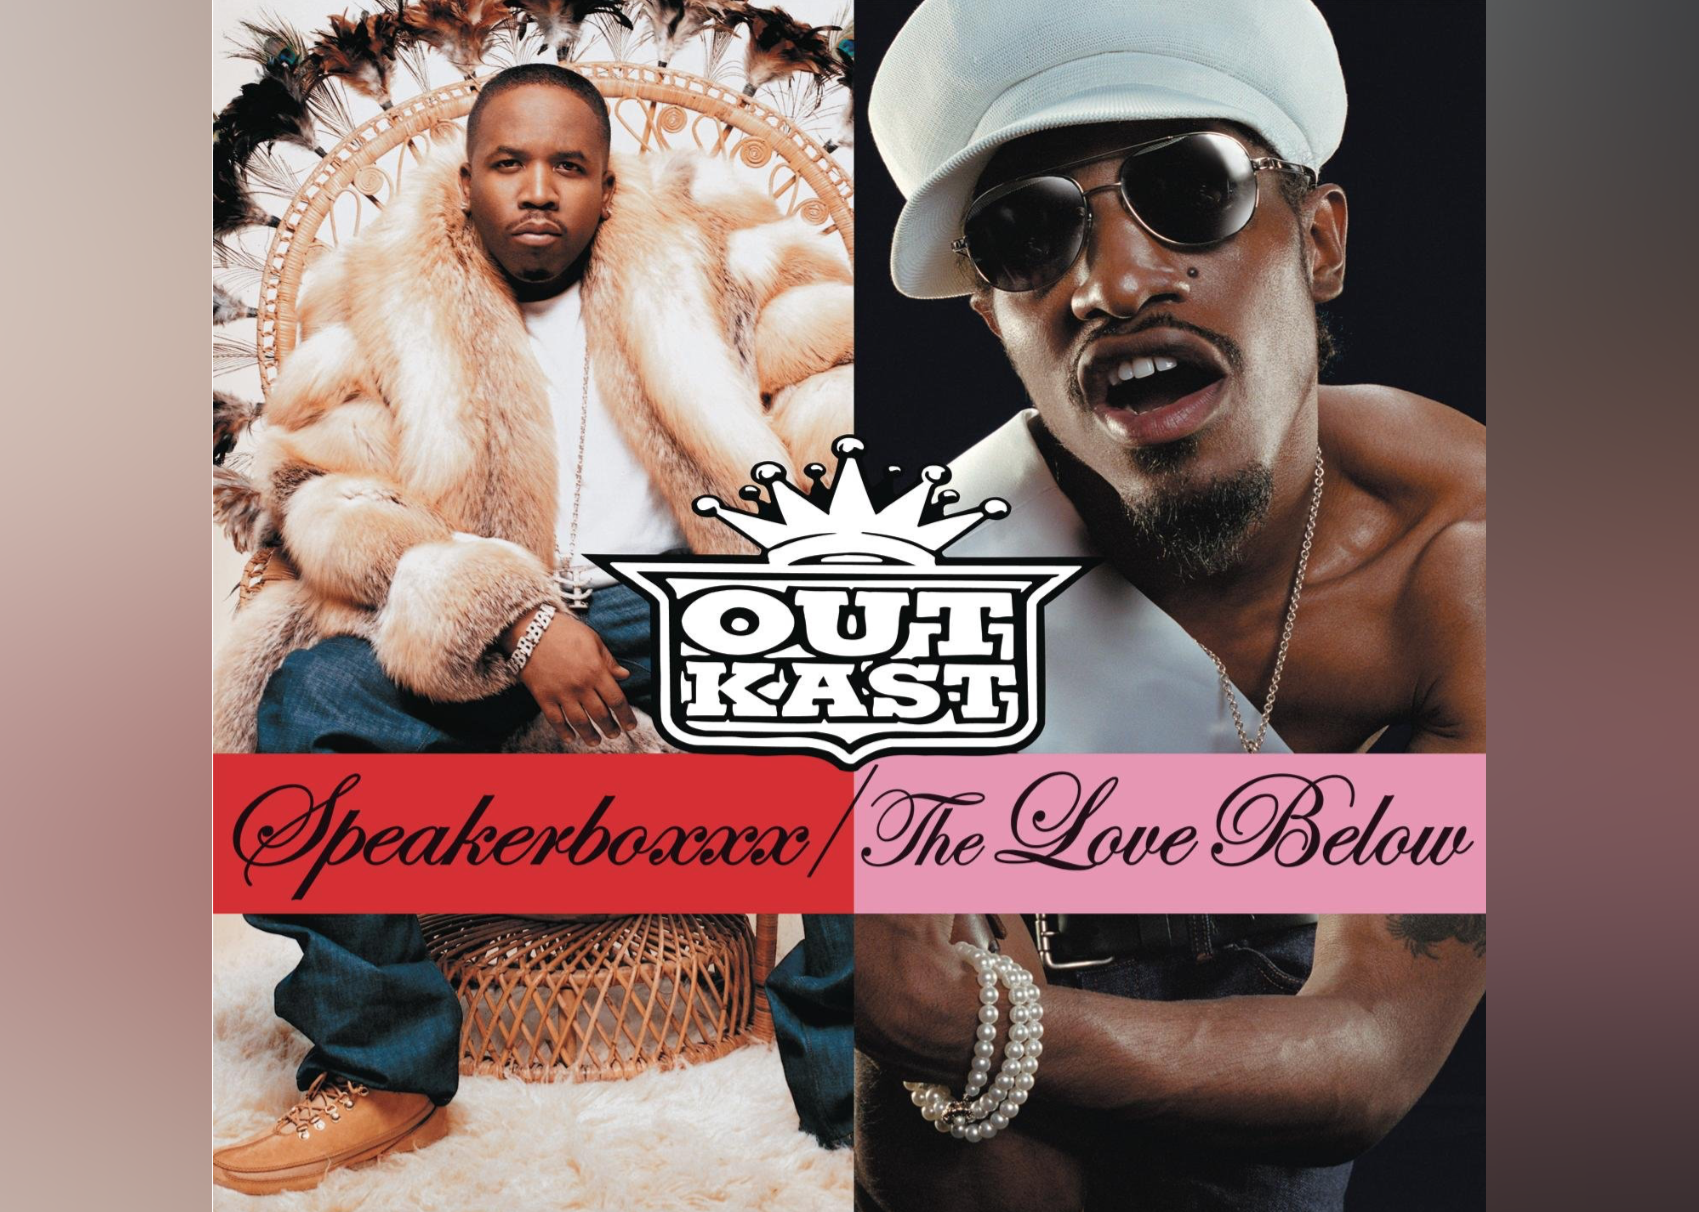 Big Boi on the left on a feathered wicker throne in a fur coat and Andre 3000 on the right wearing a white hat, sunglasses and pearl bracelets.